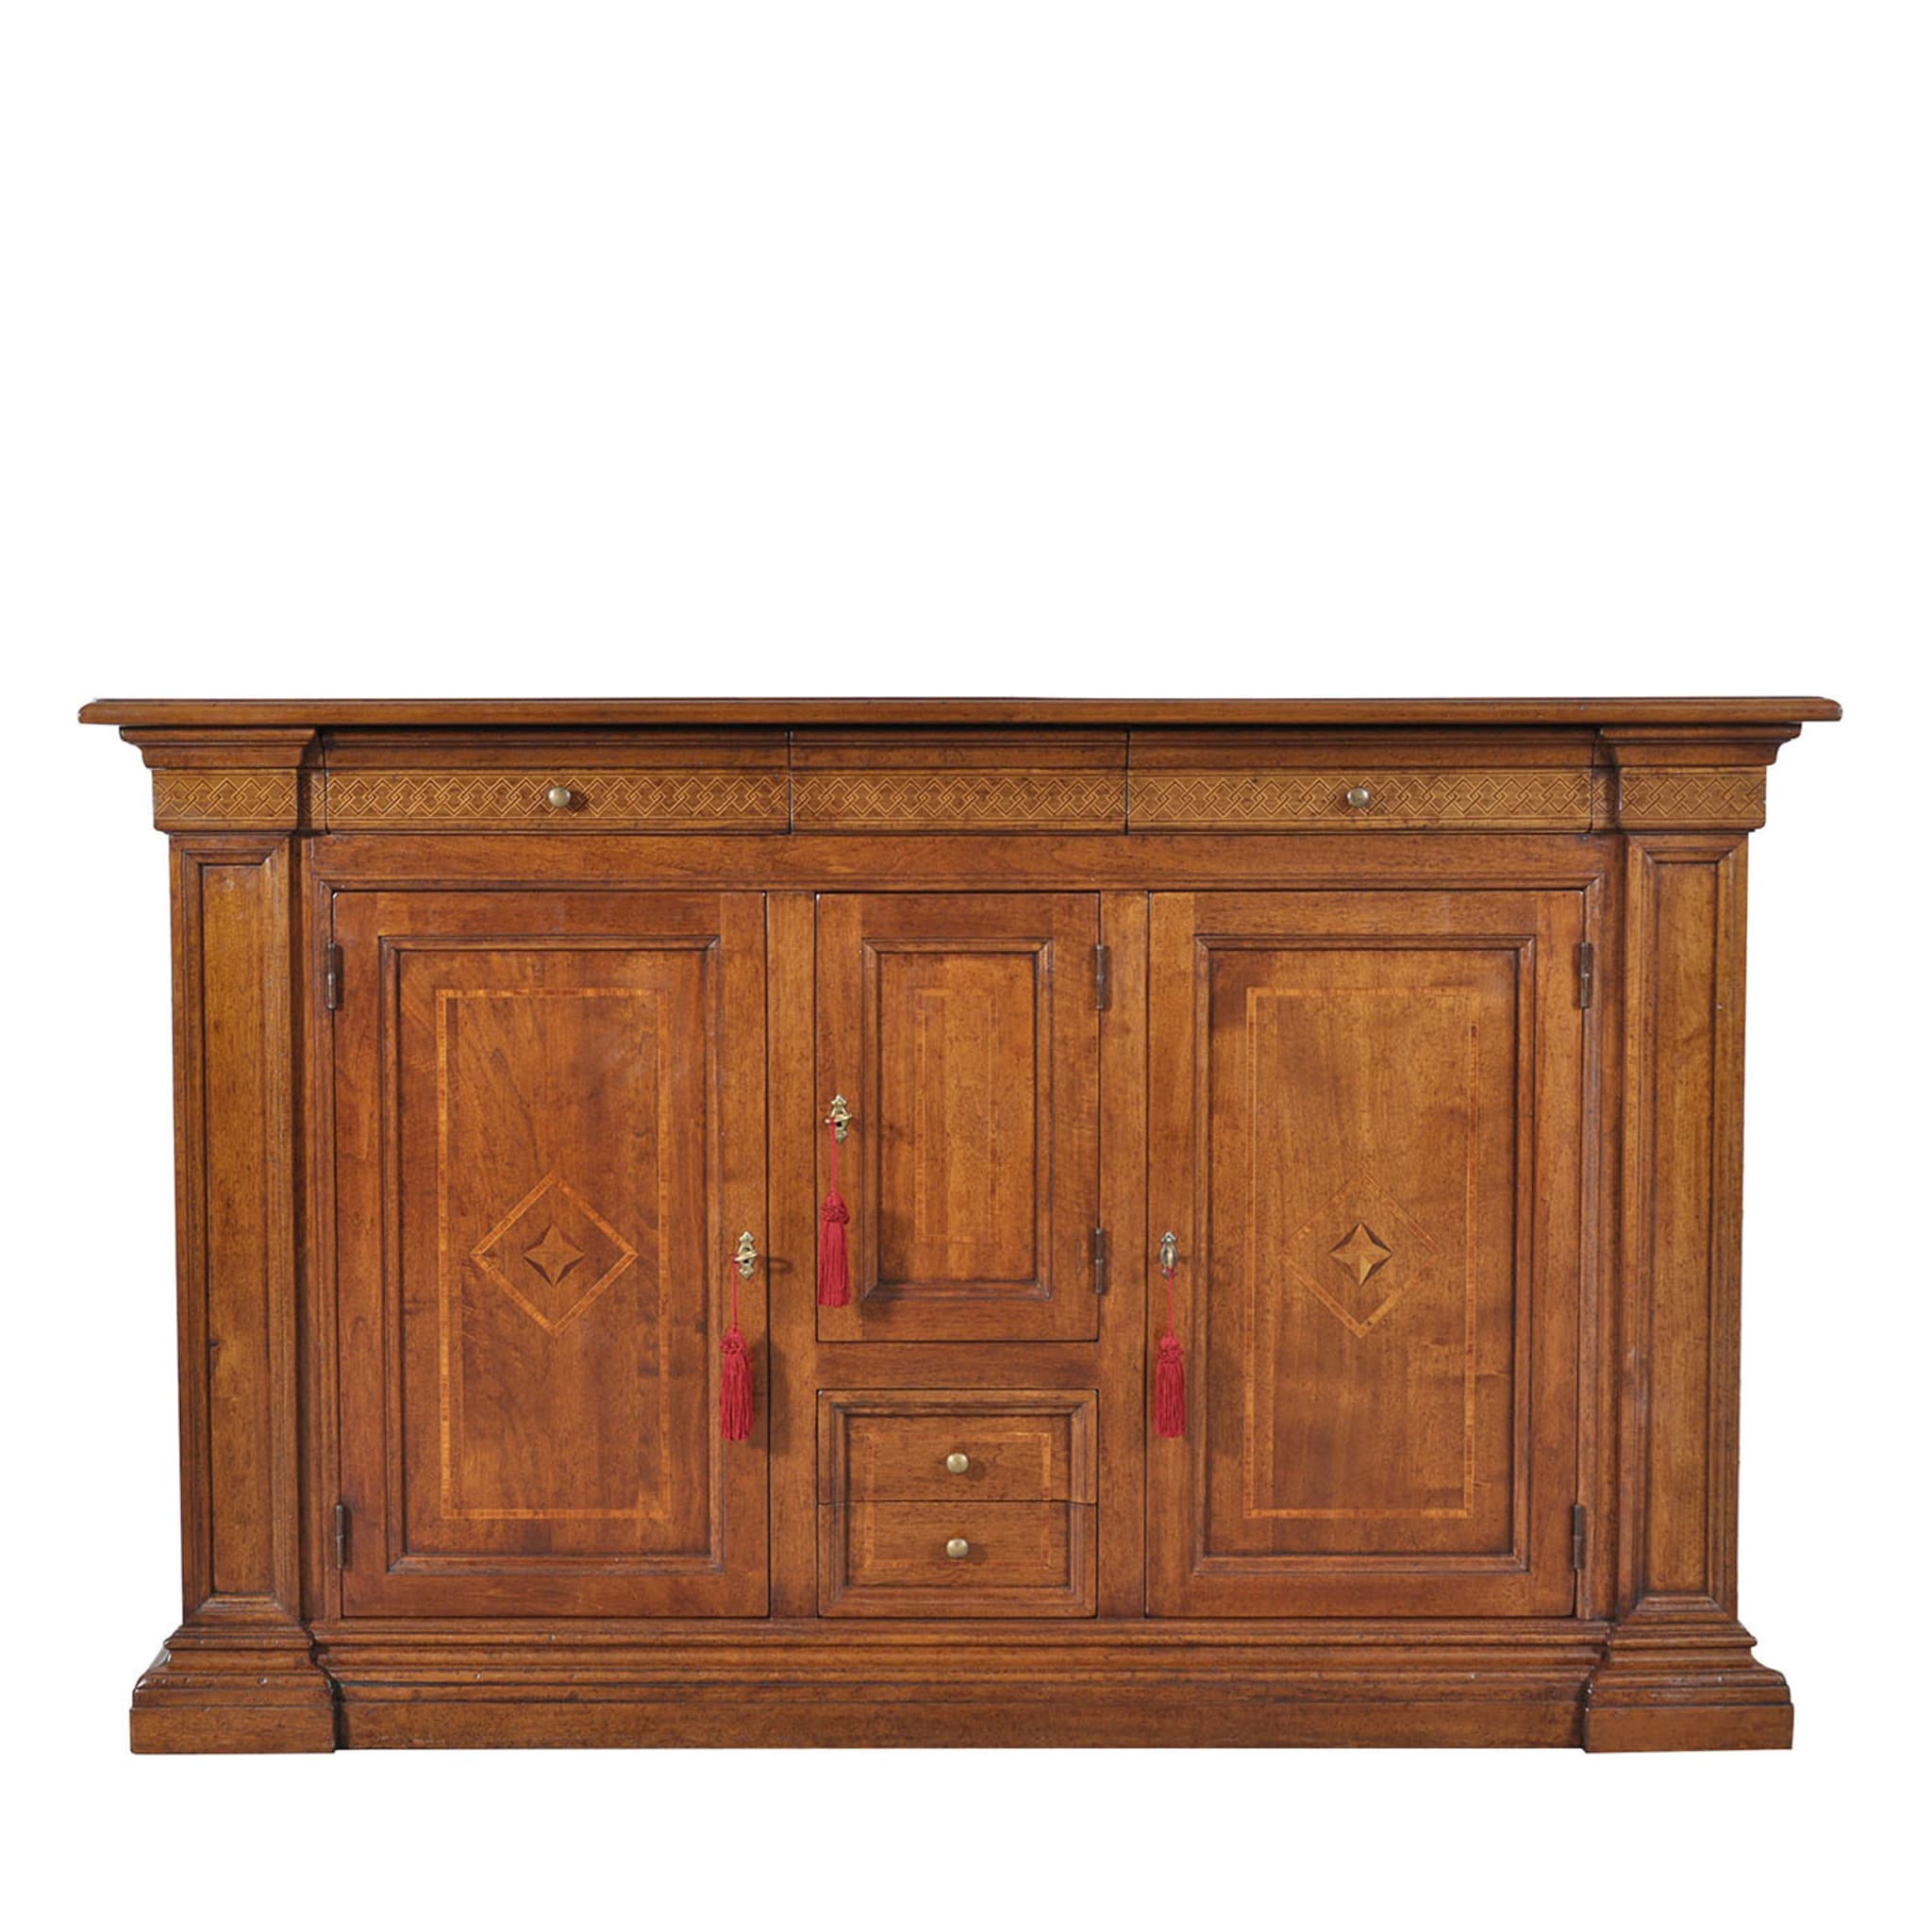 Toscano '500 Tuscan-Style Inlaid Sideboard - Main view